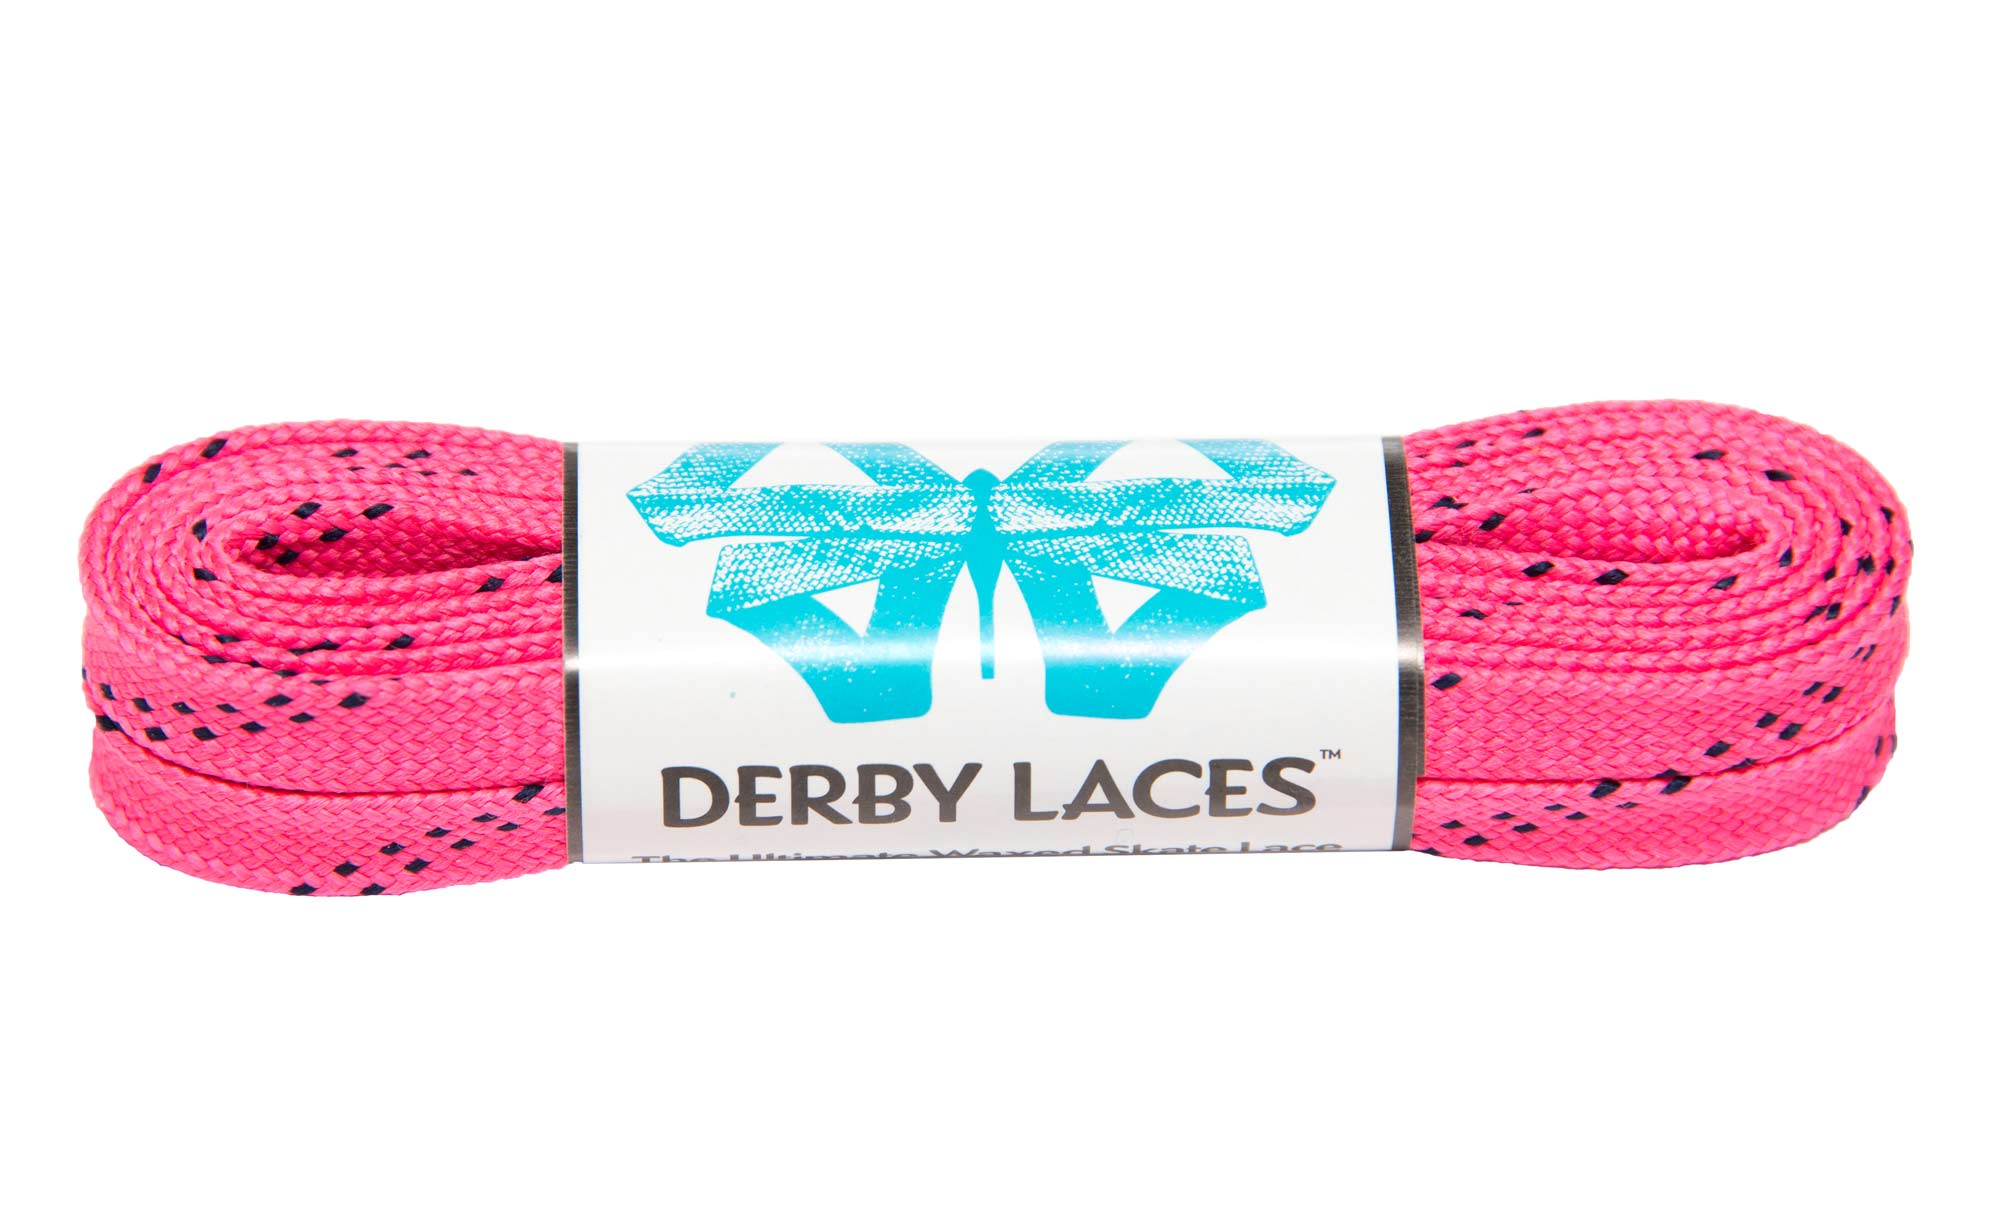 Hot Pink - 60 inch (152 cm) ORIGIN by Derby Laces Waxed 1cm Wide Lace for Ska...